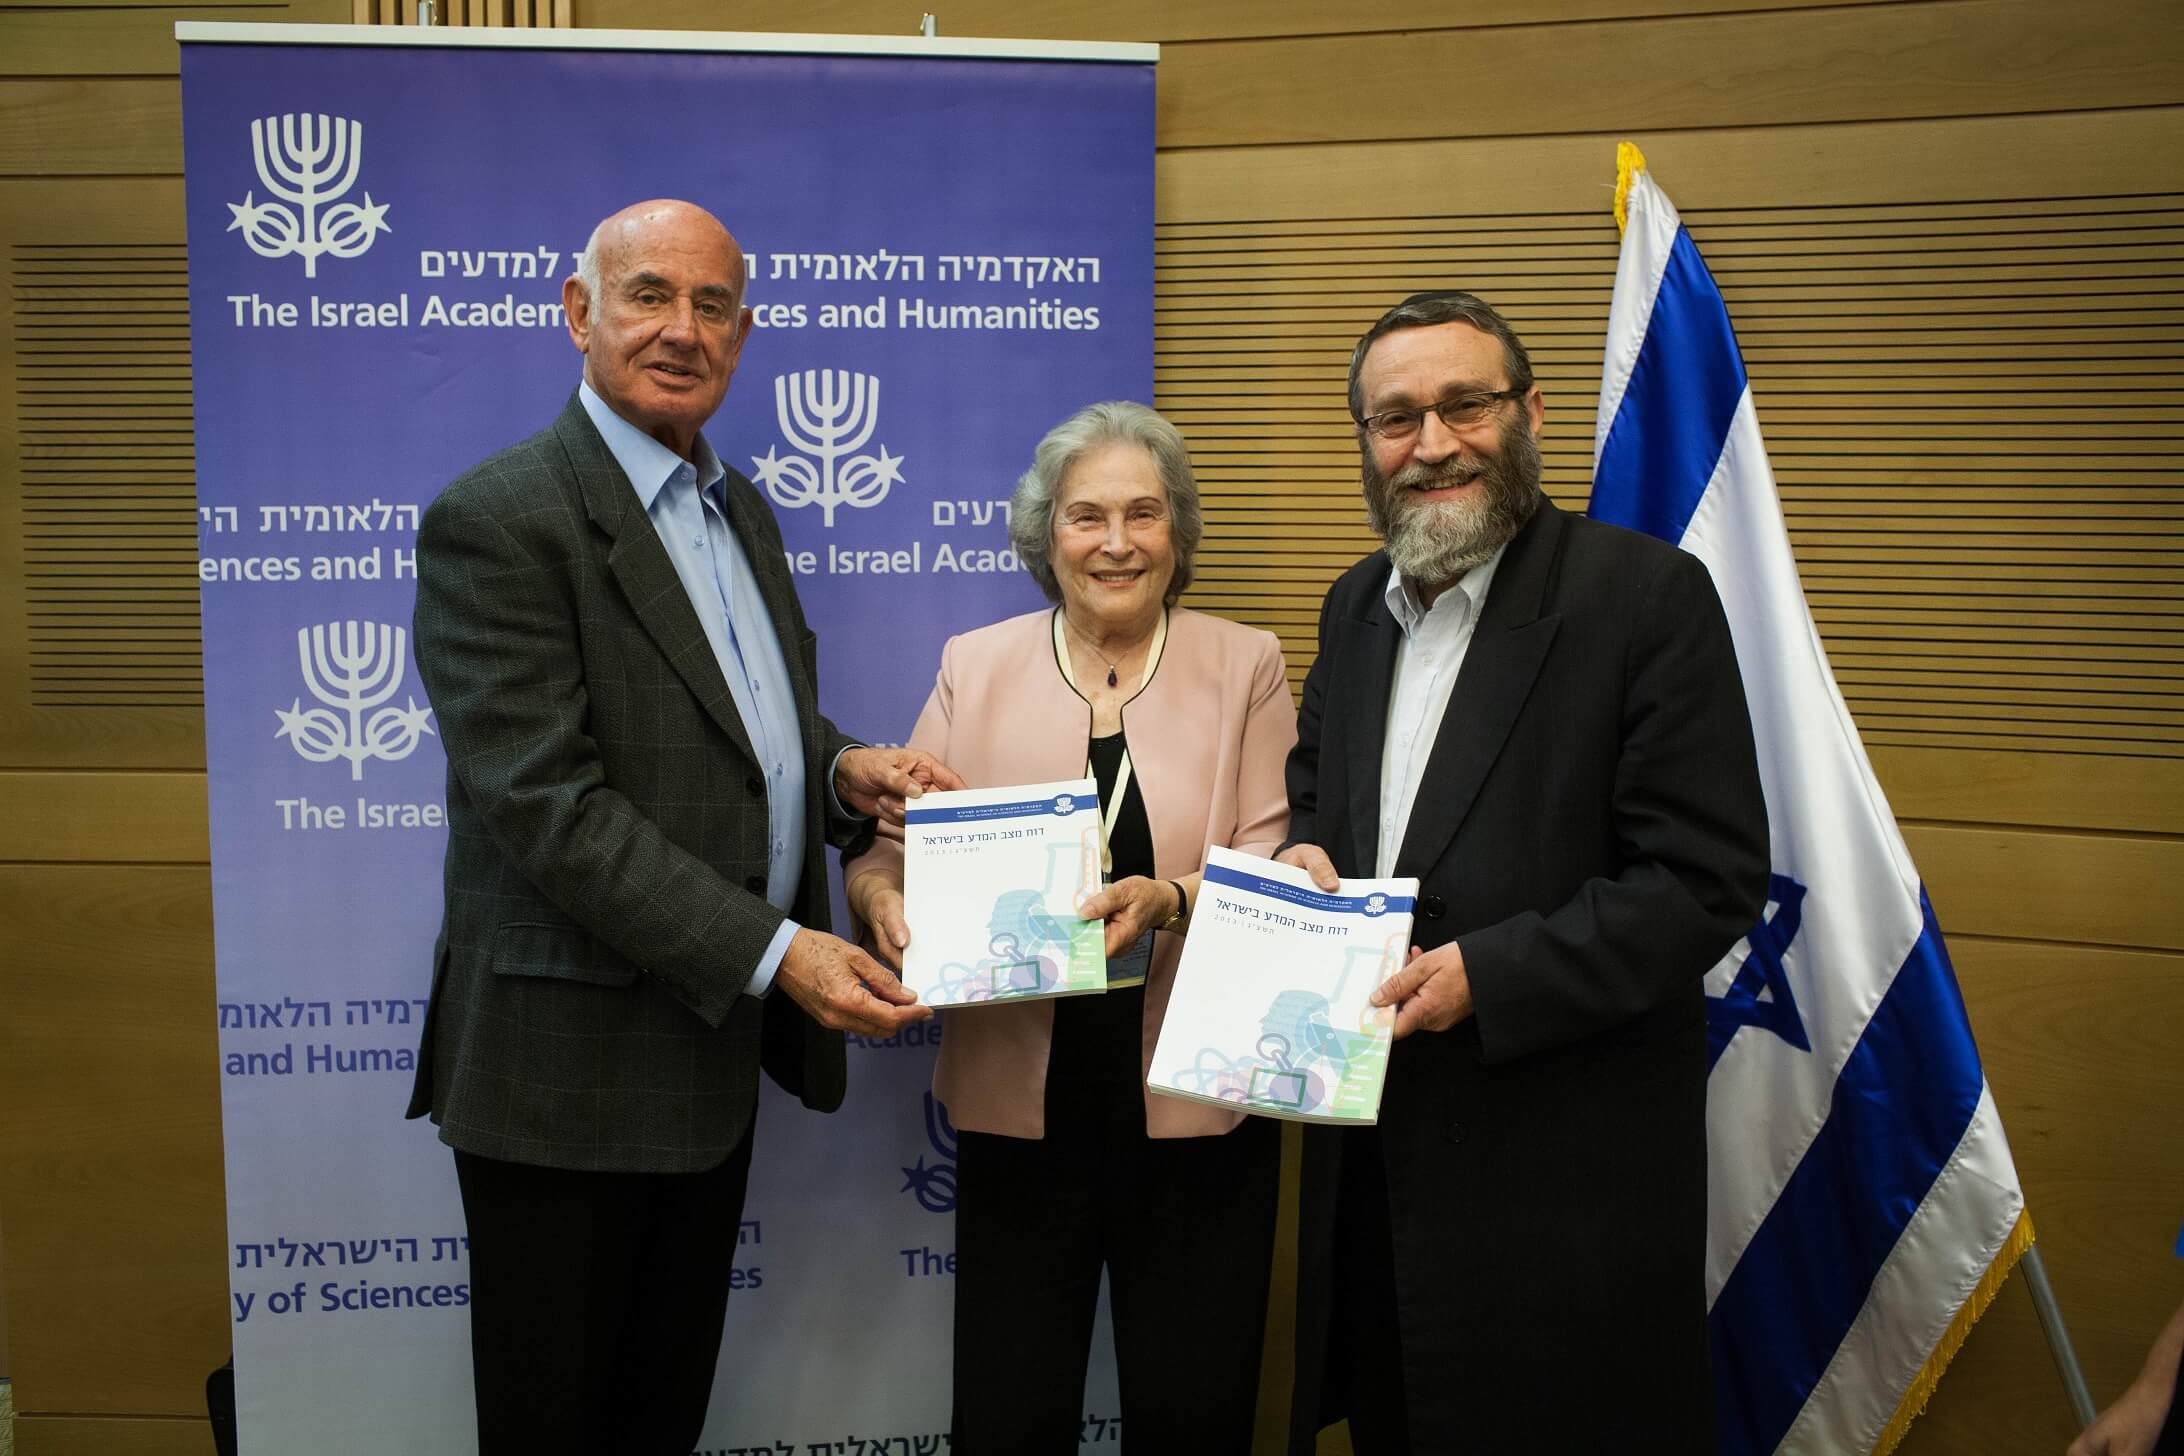 The President of the Academy of Sciences, Prof. Ruth Arnon, presents the State of Science report to Minister of Science Yaakov Perry and the Chairman of the Knesset's Science Committee, MK Moshe Gafni, October 23, 2013. Photo: Public Relations